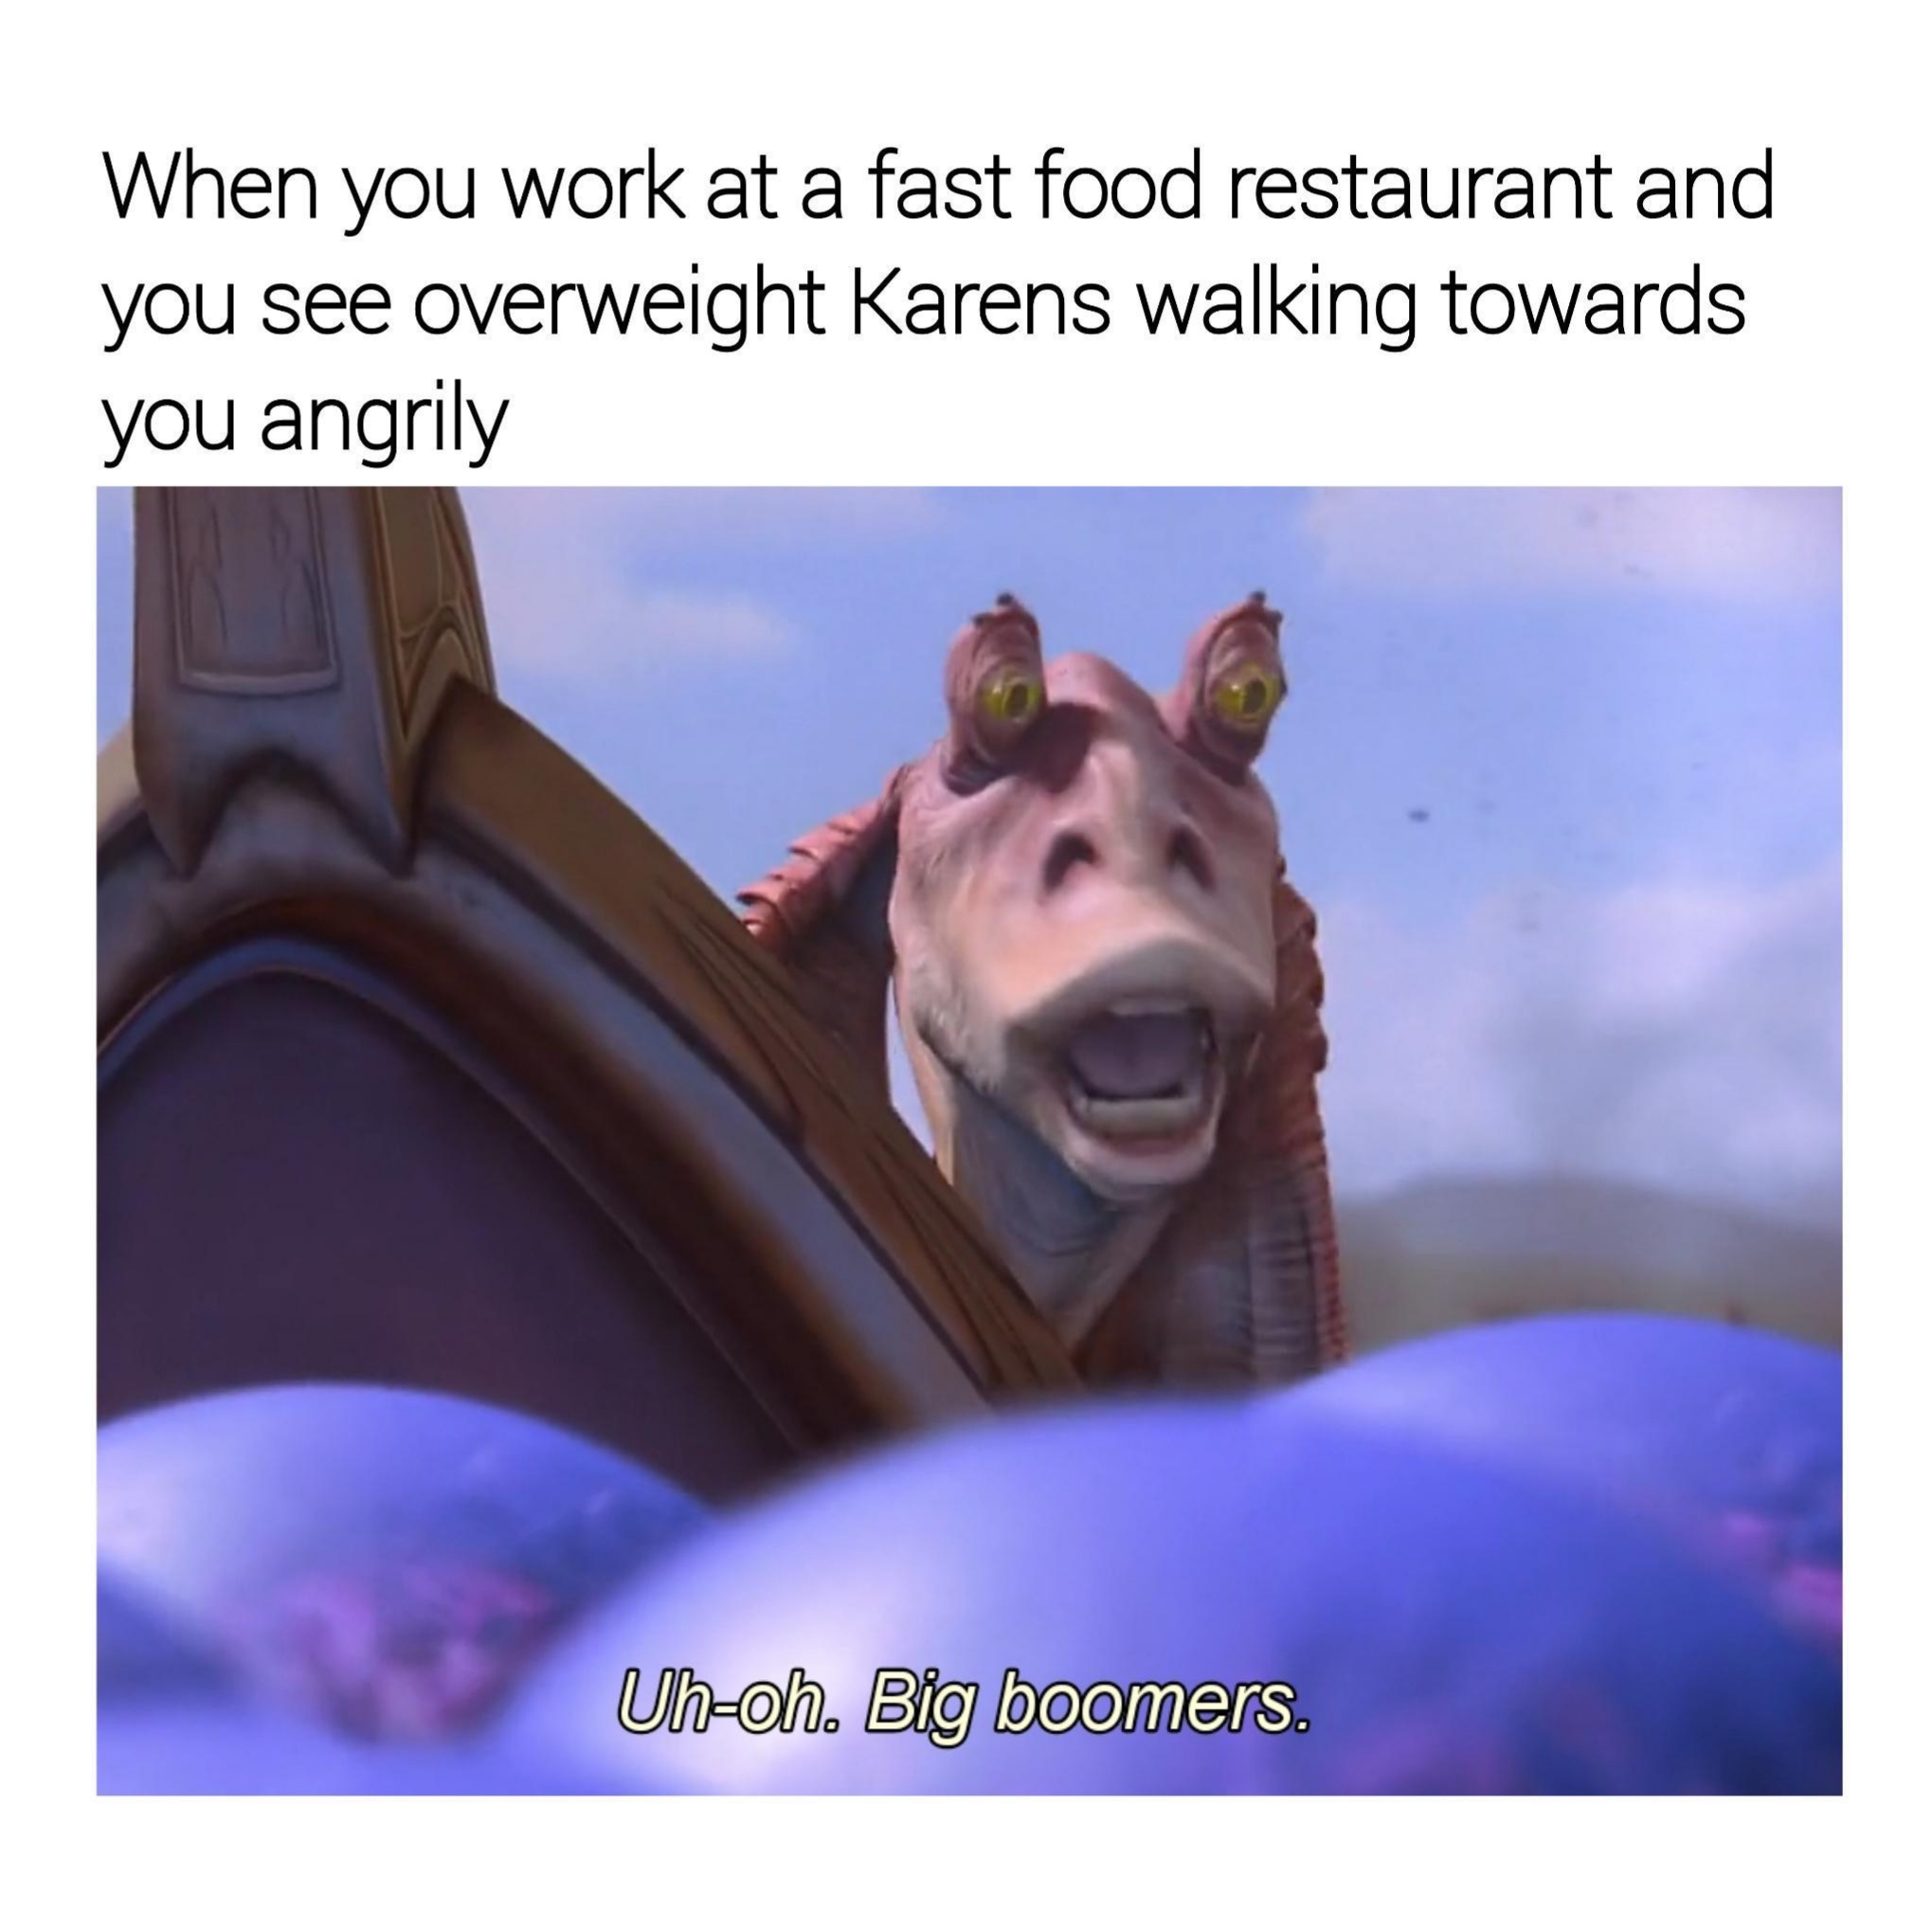 uh oh big boomers meme - When you work at a fast food restaurant and you see overweight Karens walking towards you angrily Uhoh. Big boomers.